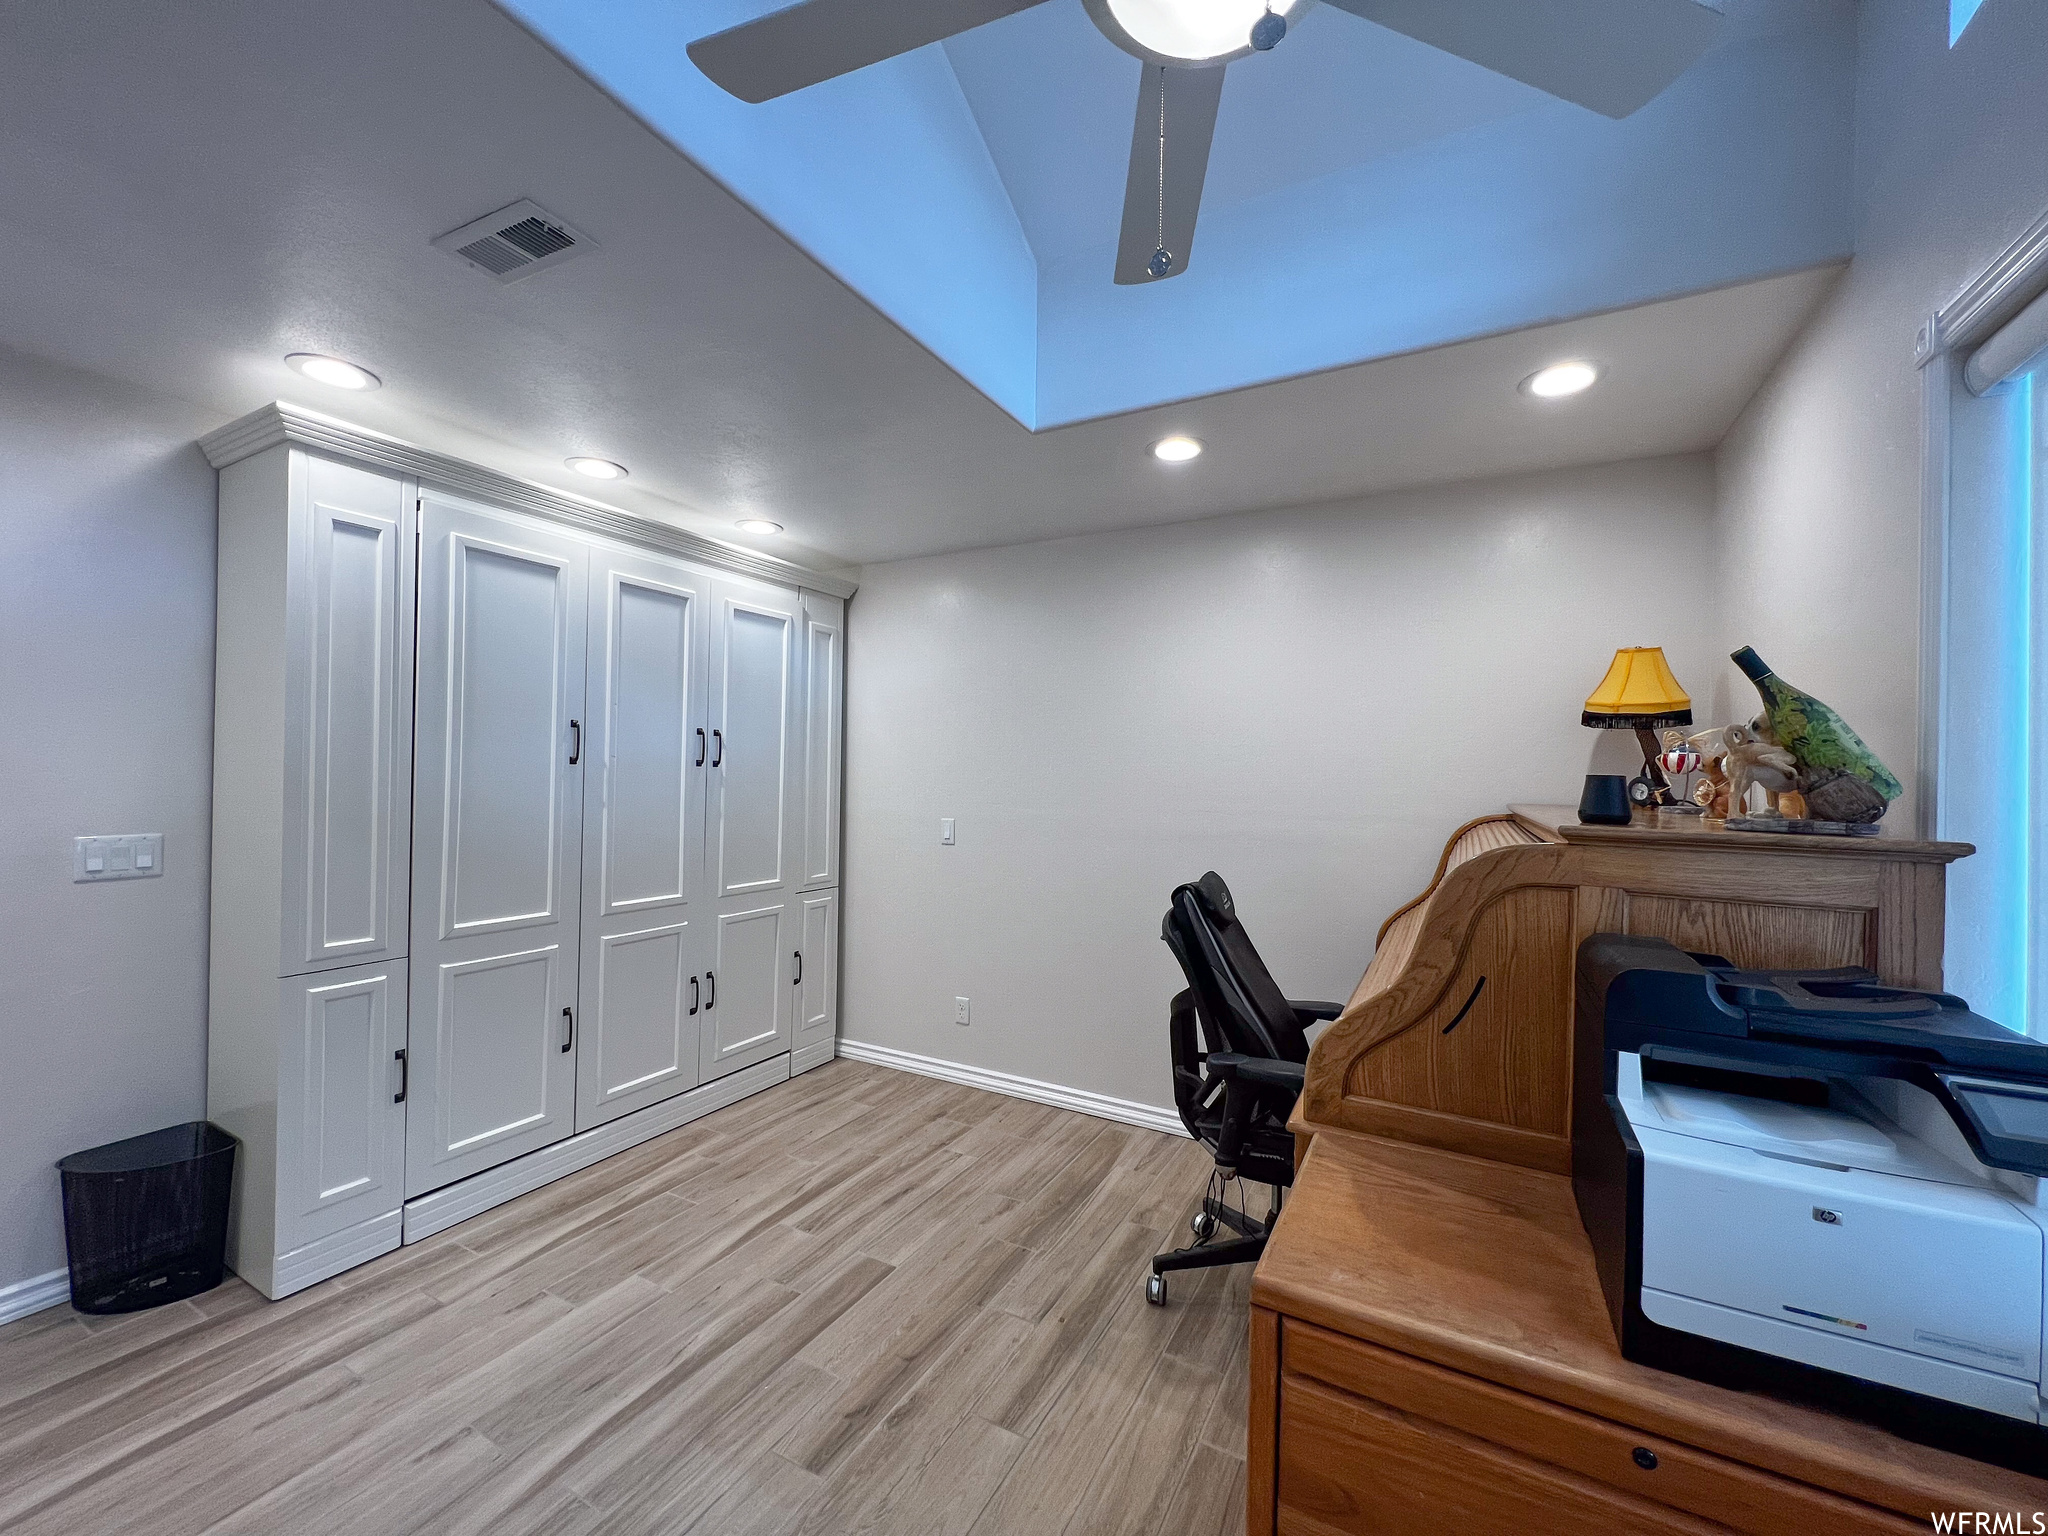 Office/bedroom with wood-type flooring and built-in Murphy bed